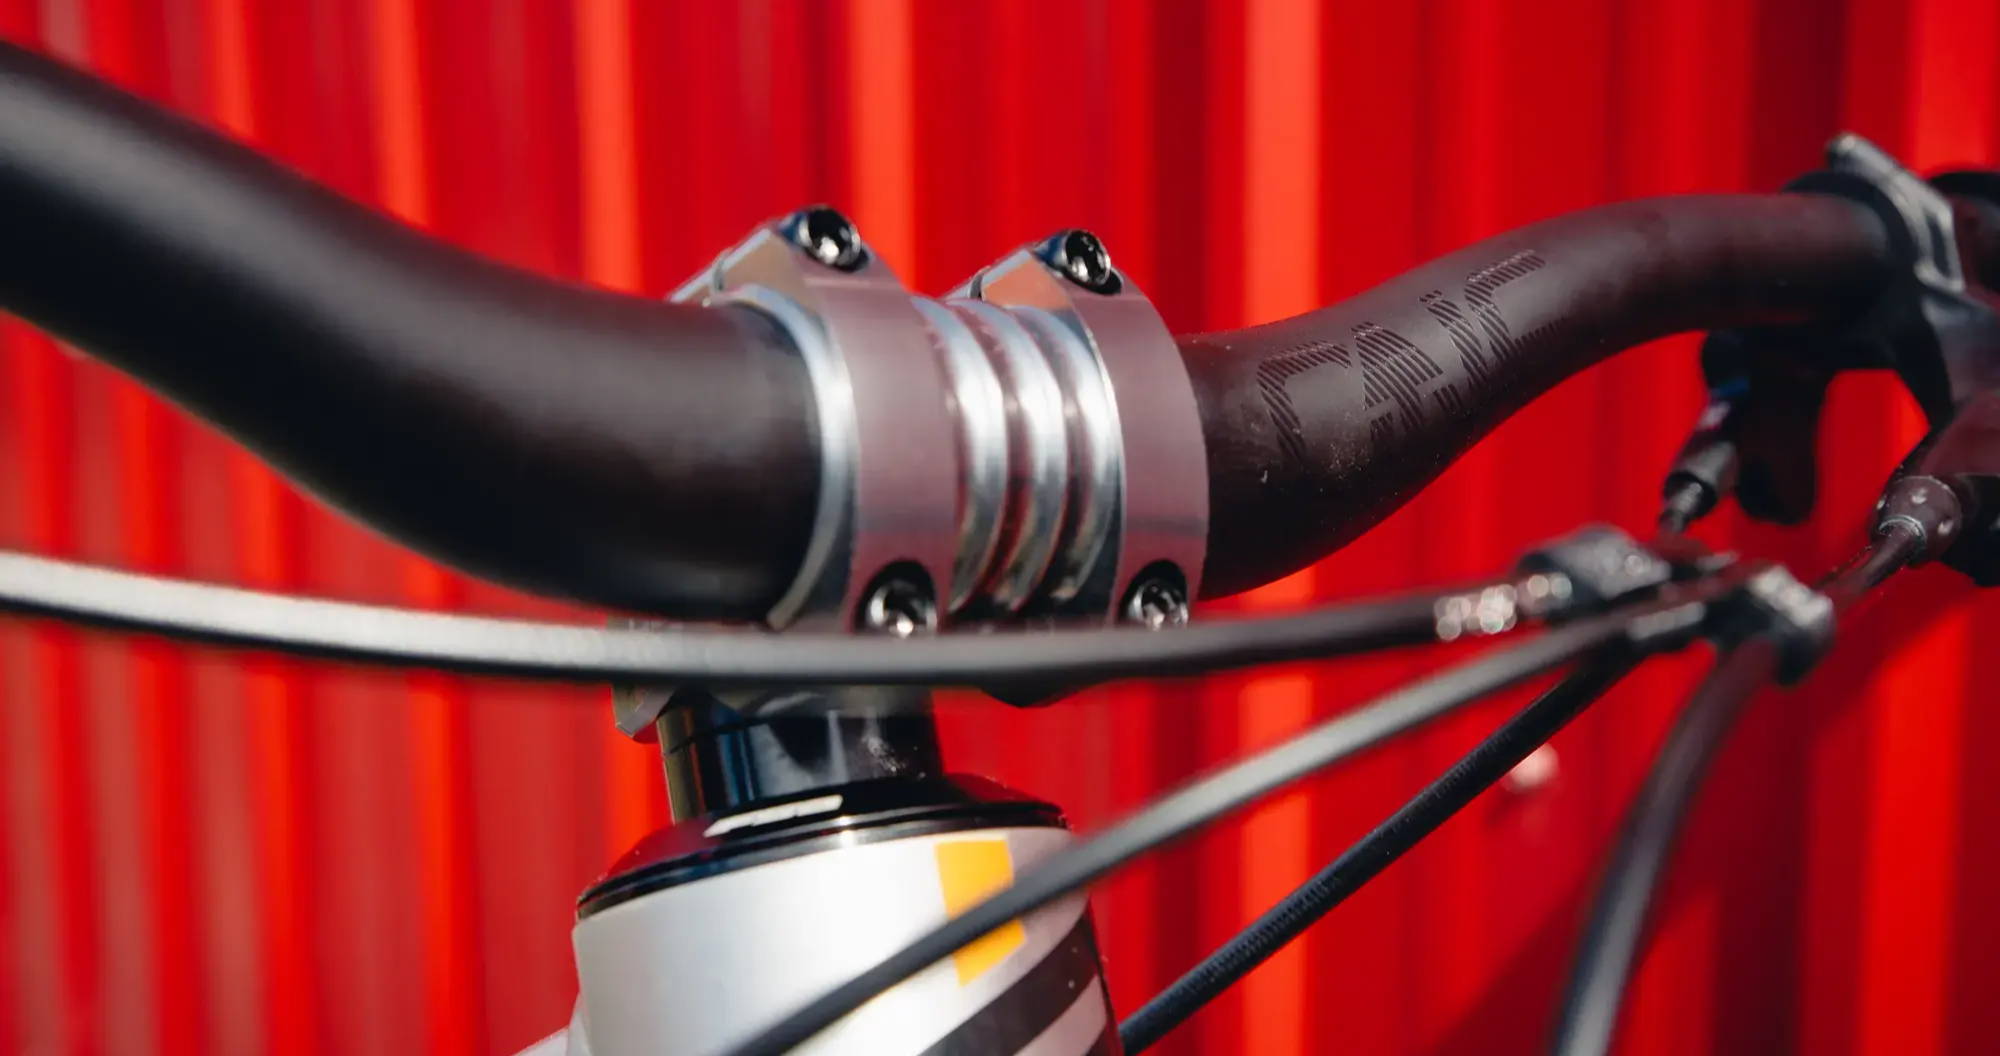 deity copperhead mountain bike stem with oneup components carbon handlebars attached from the front on a red background